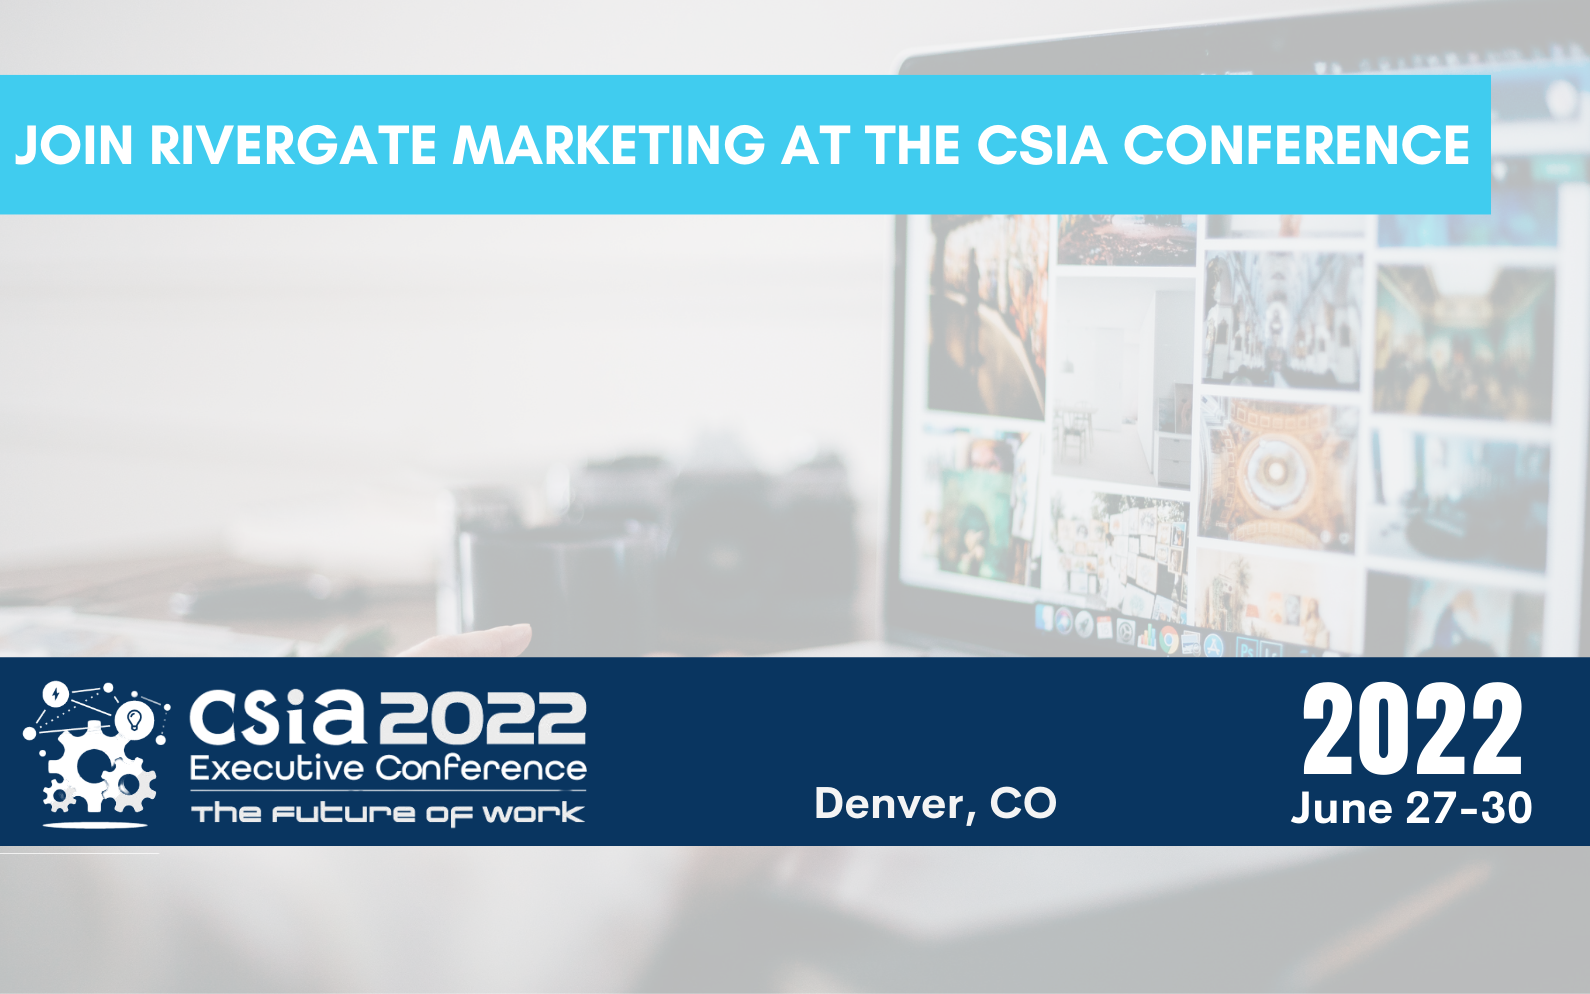 Join Rivergate Marketing at the CSIA Executive Conference 2022.